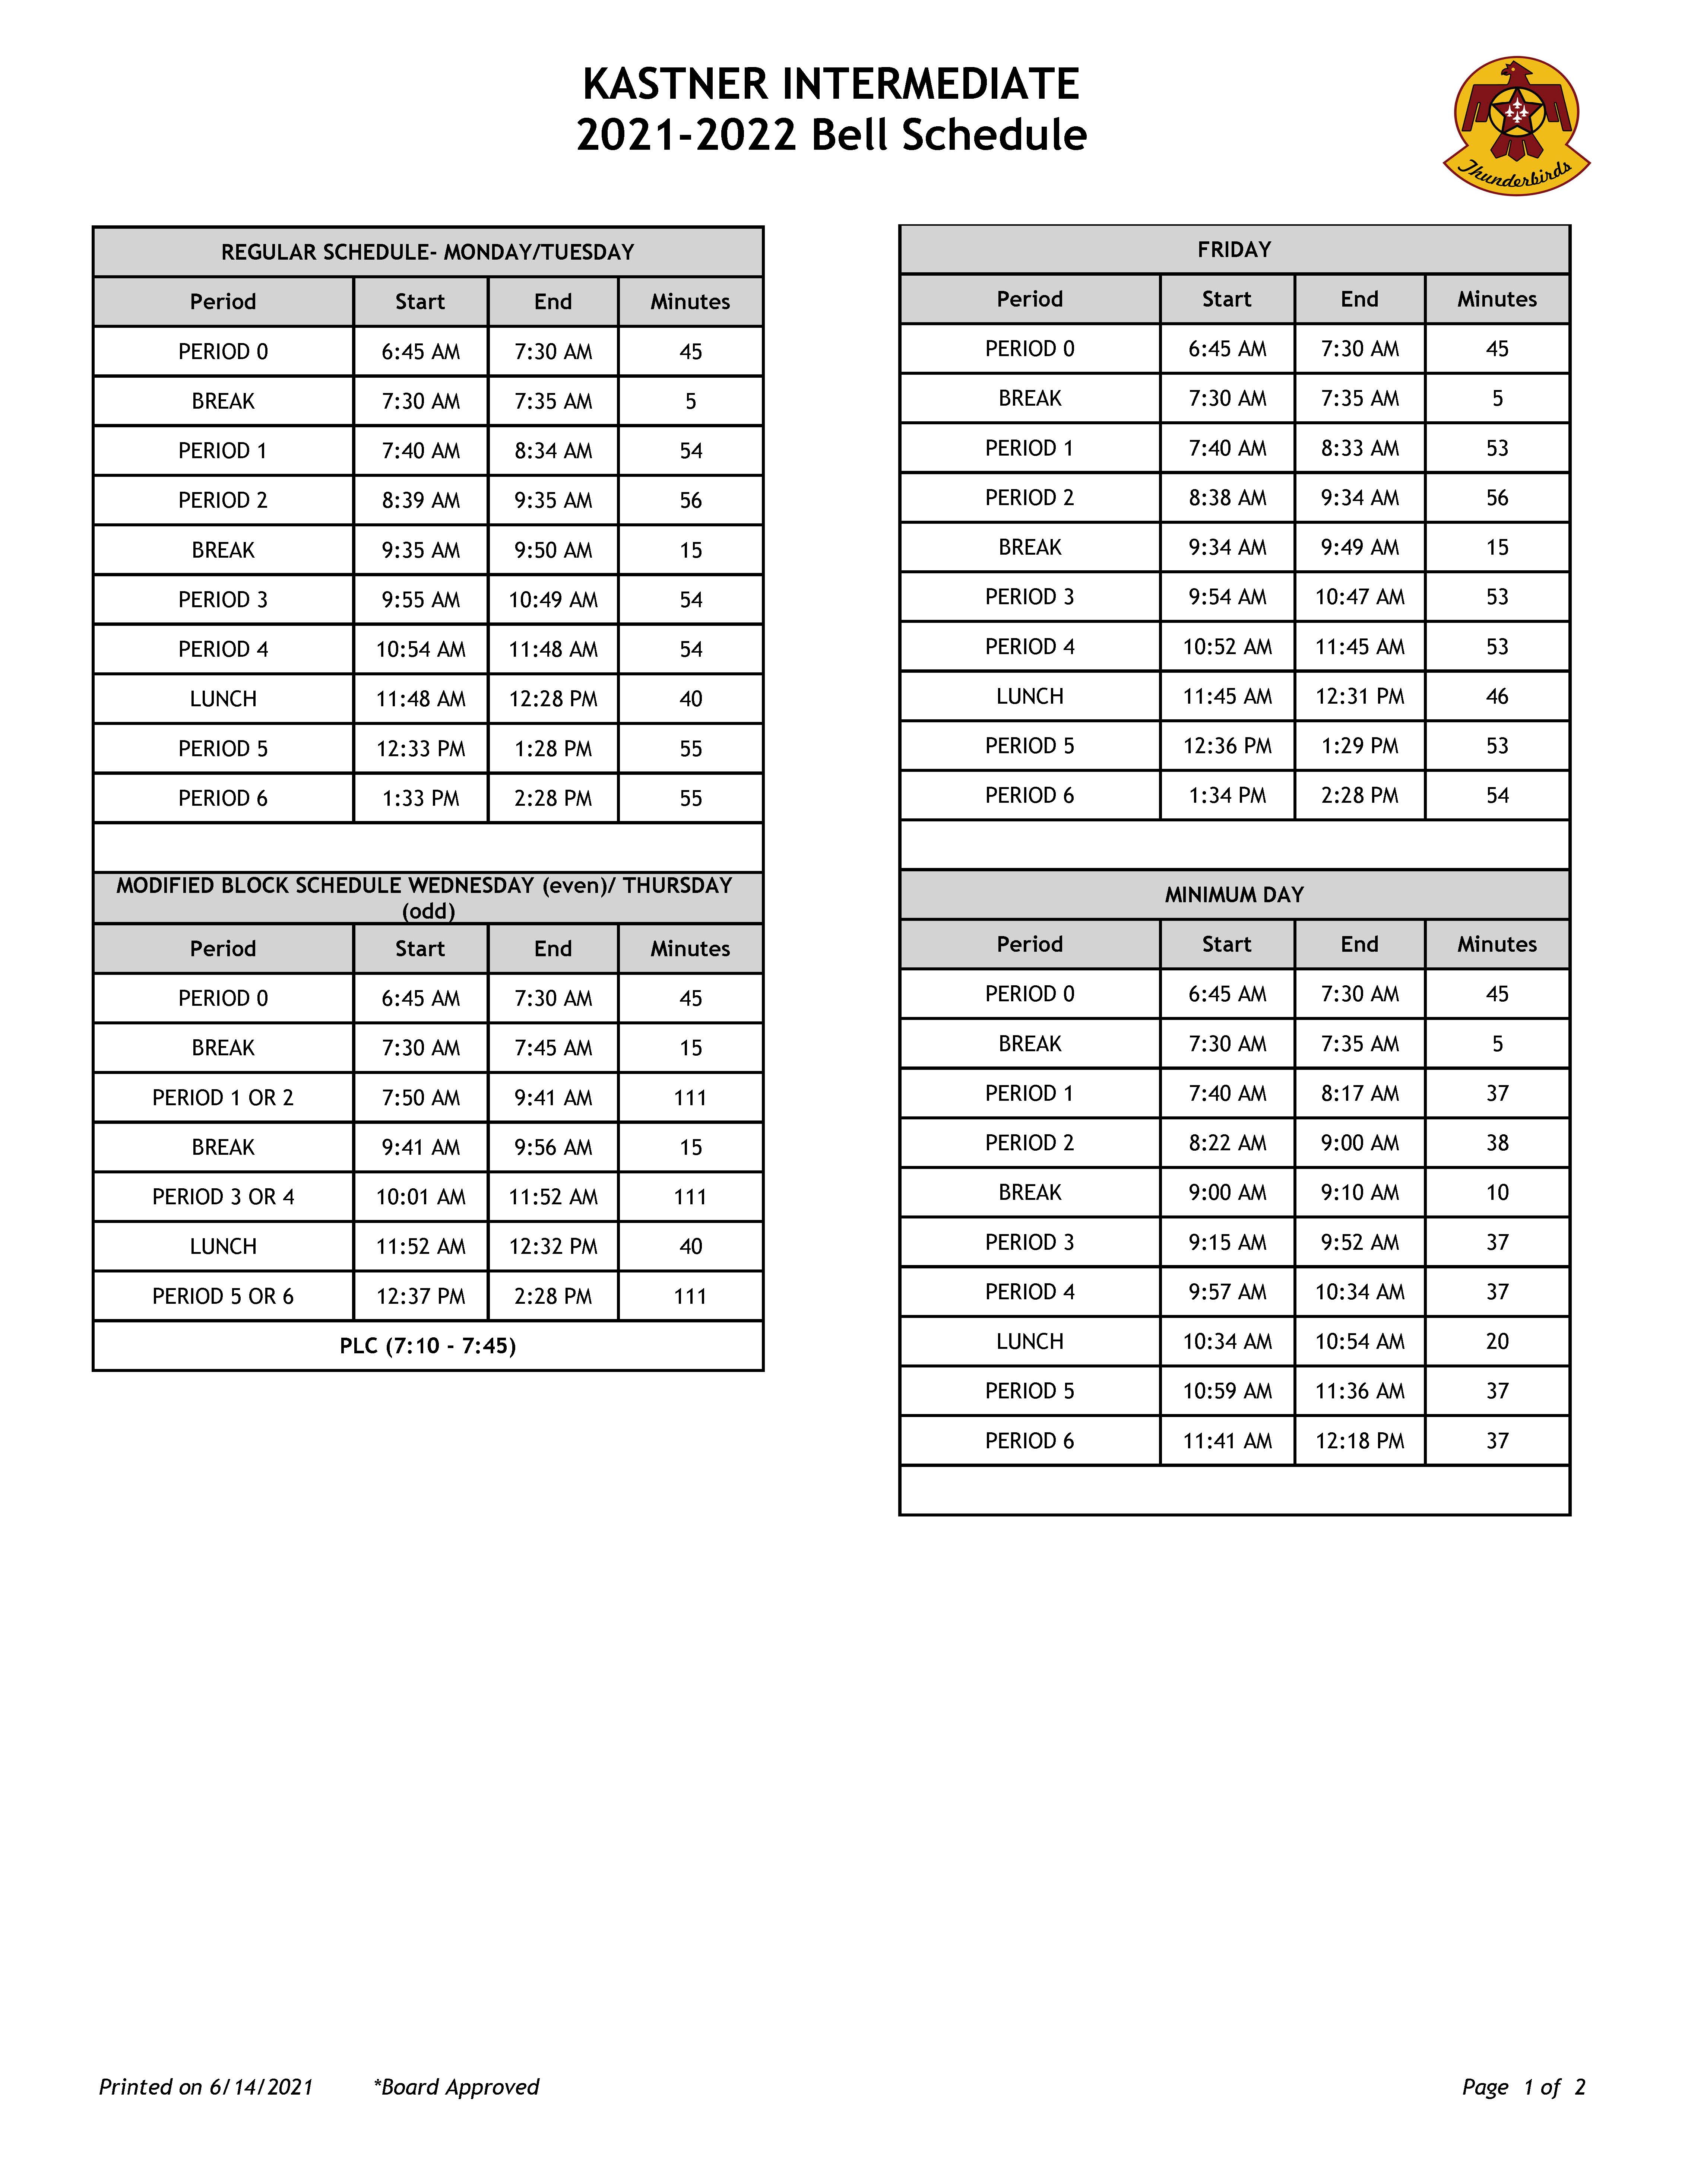 bell schedule 21-22 page 1